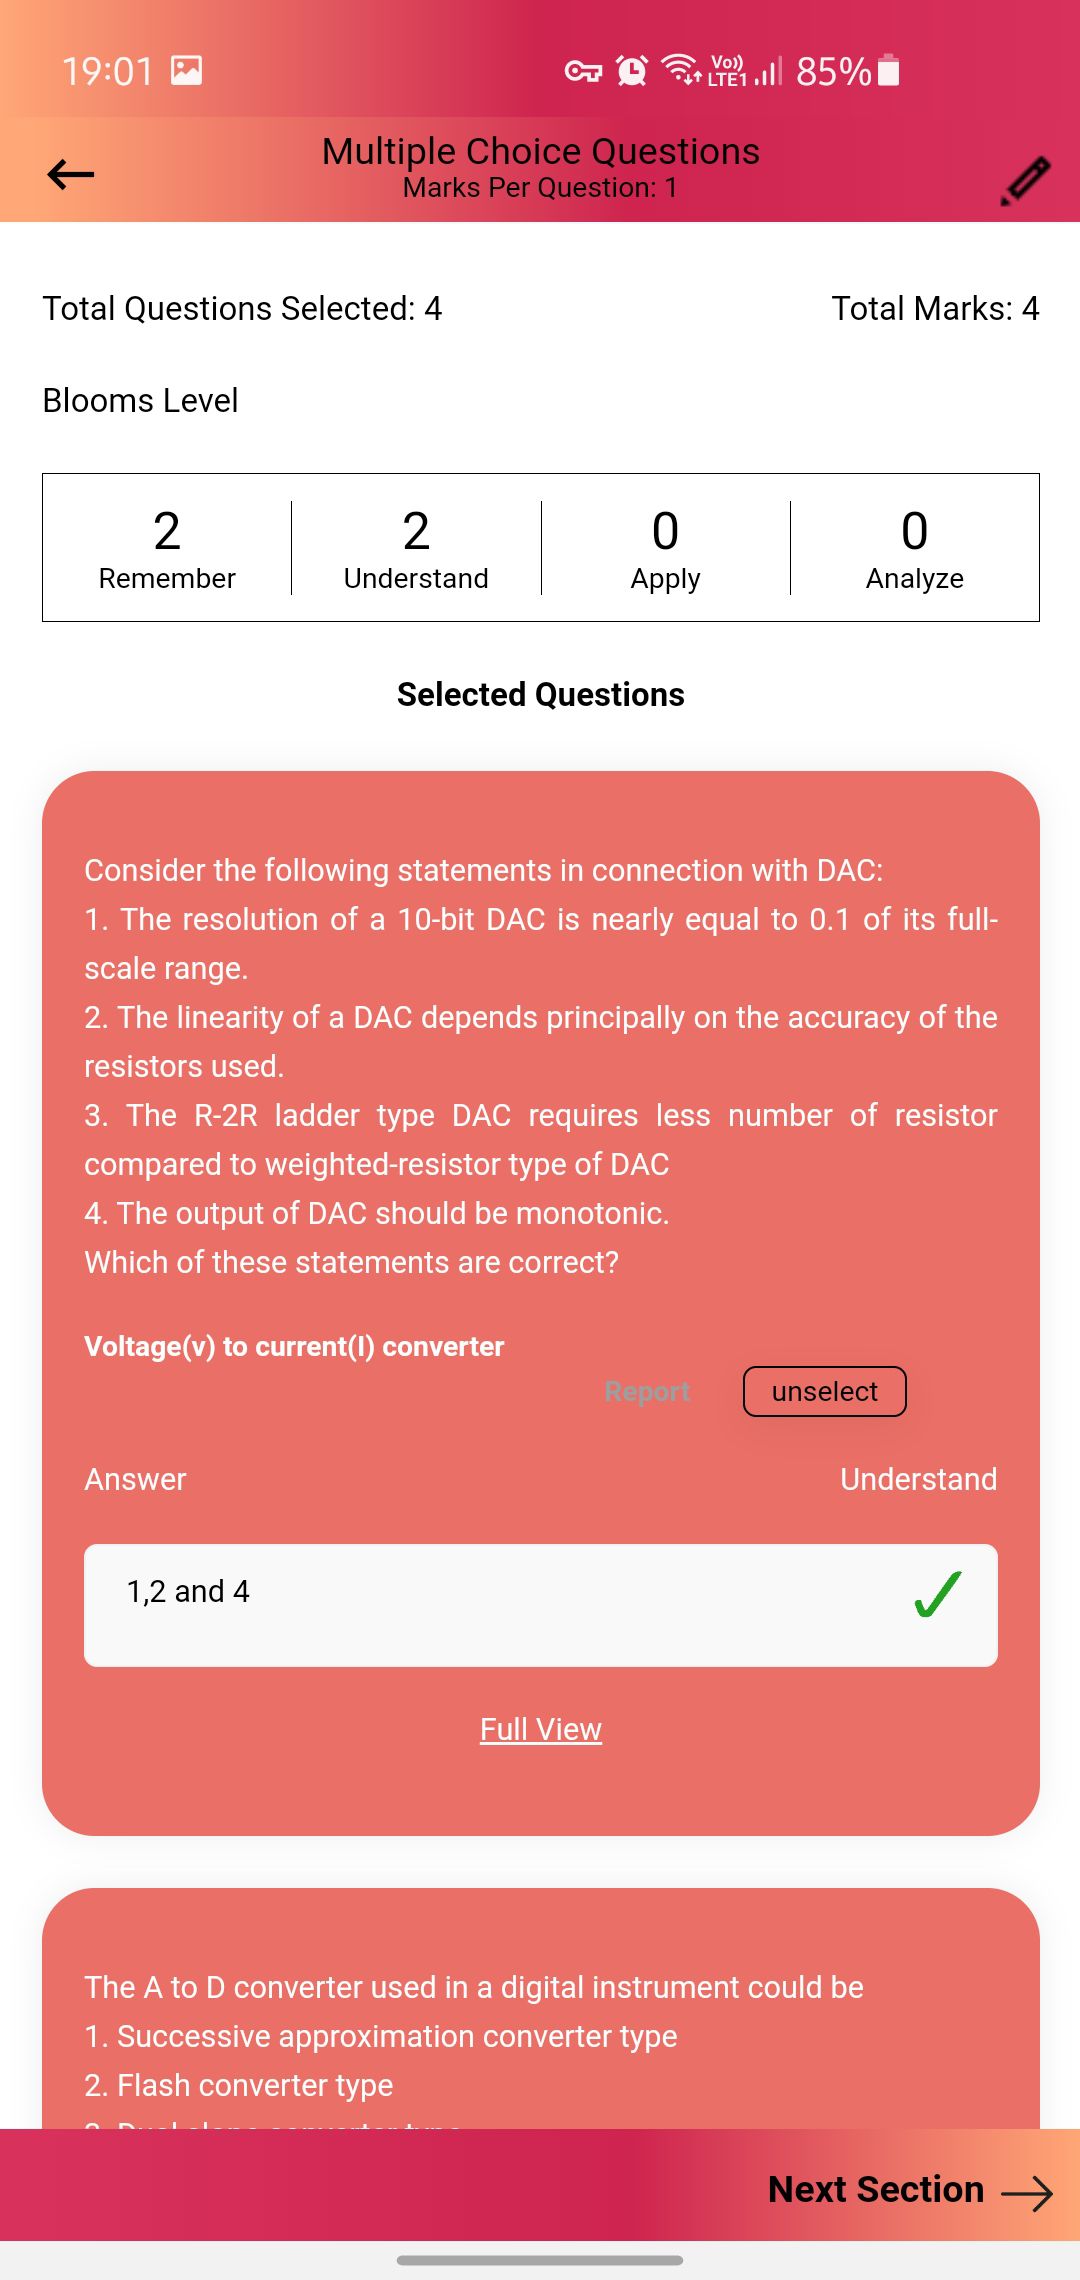 10. Verify the Selected Questions and click on “Next Section” to Proceed Further.